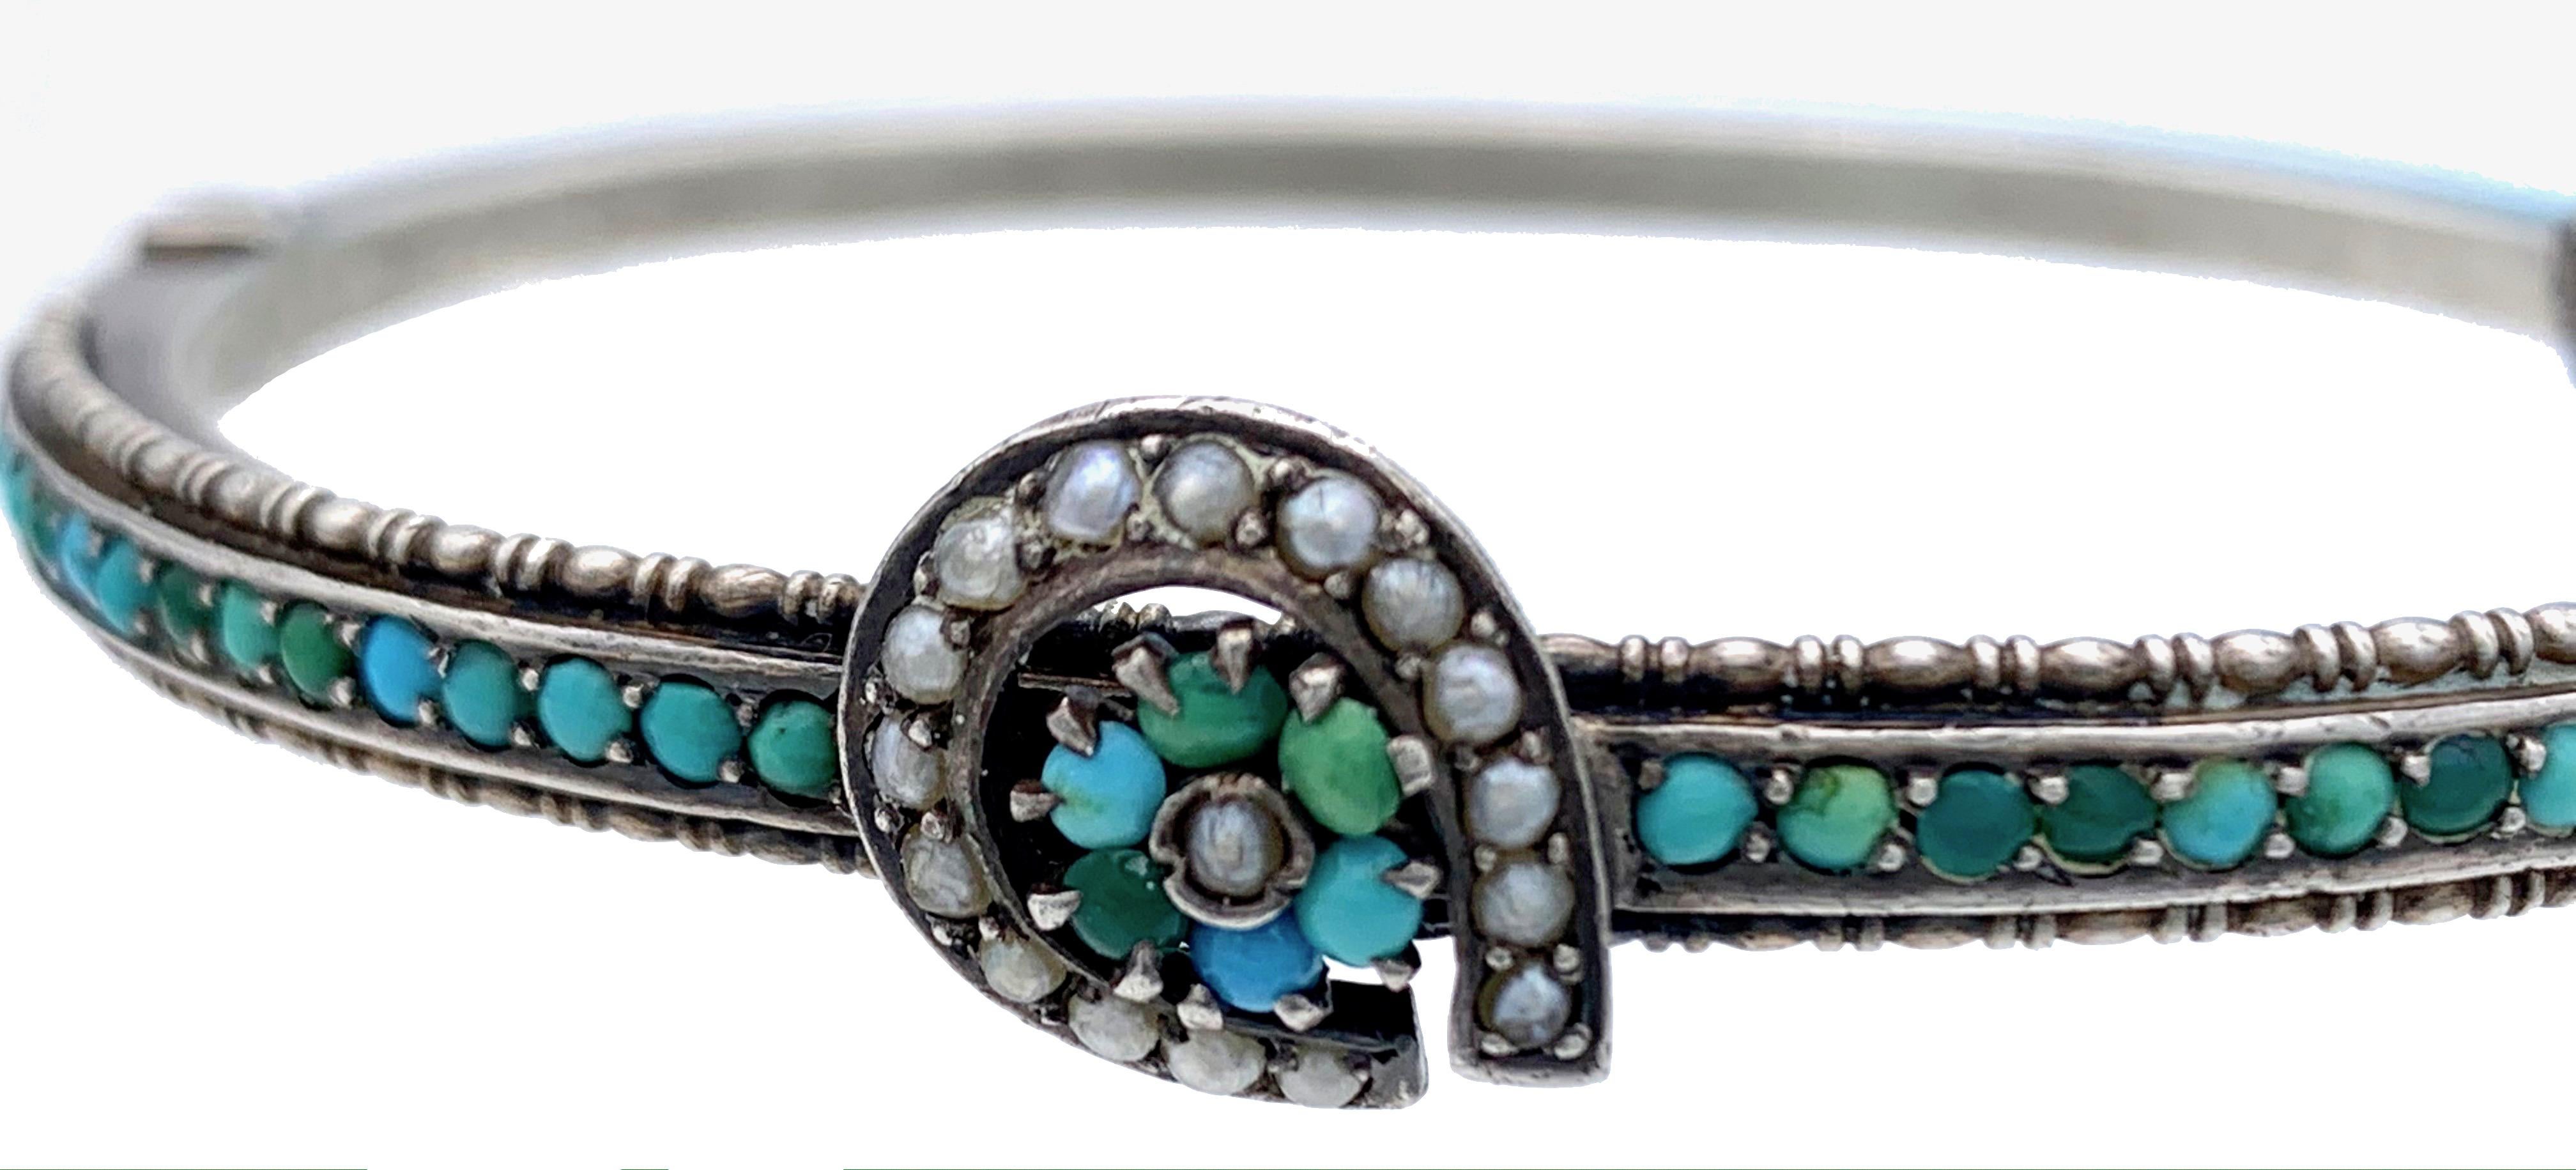 Antique 1880 Victorian Horseshoe Good Luck Bangle Turquoise Pearl Silver In Good Condition For Sale In Munich, Bavaria